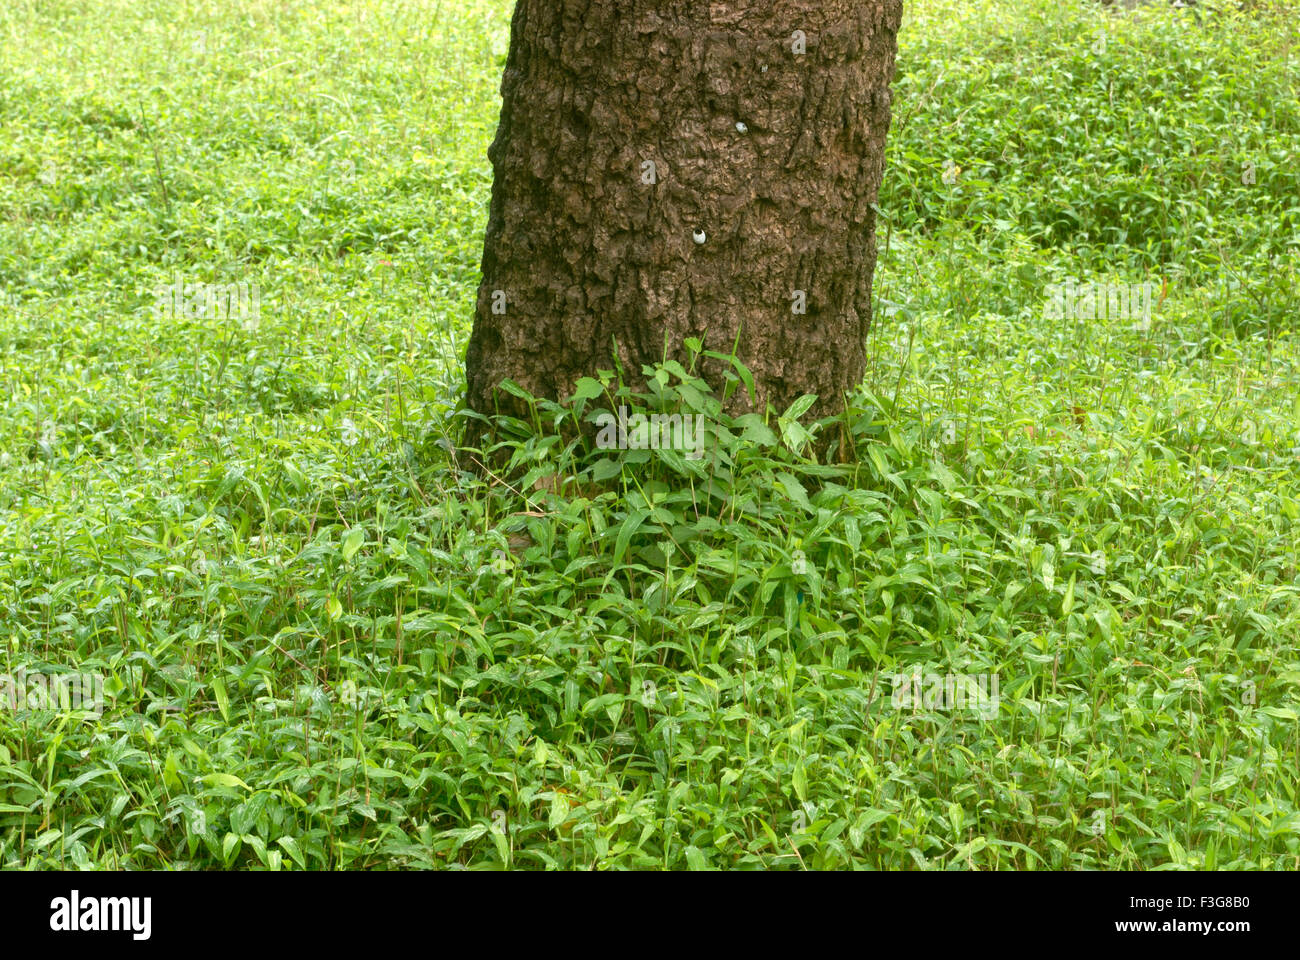 Bottom of trunk of very old trees surrounded by lush green grass at Sanjay Gandhi National Park ; Borivali Mumbai Stock Photo